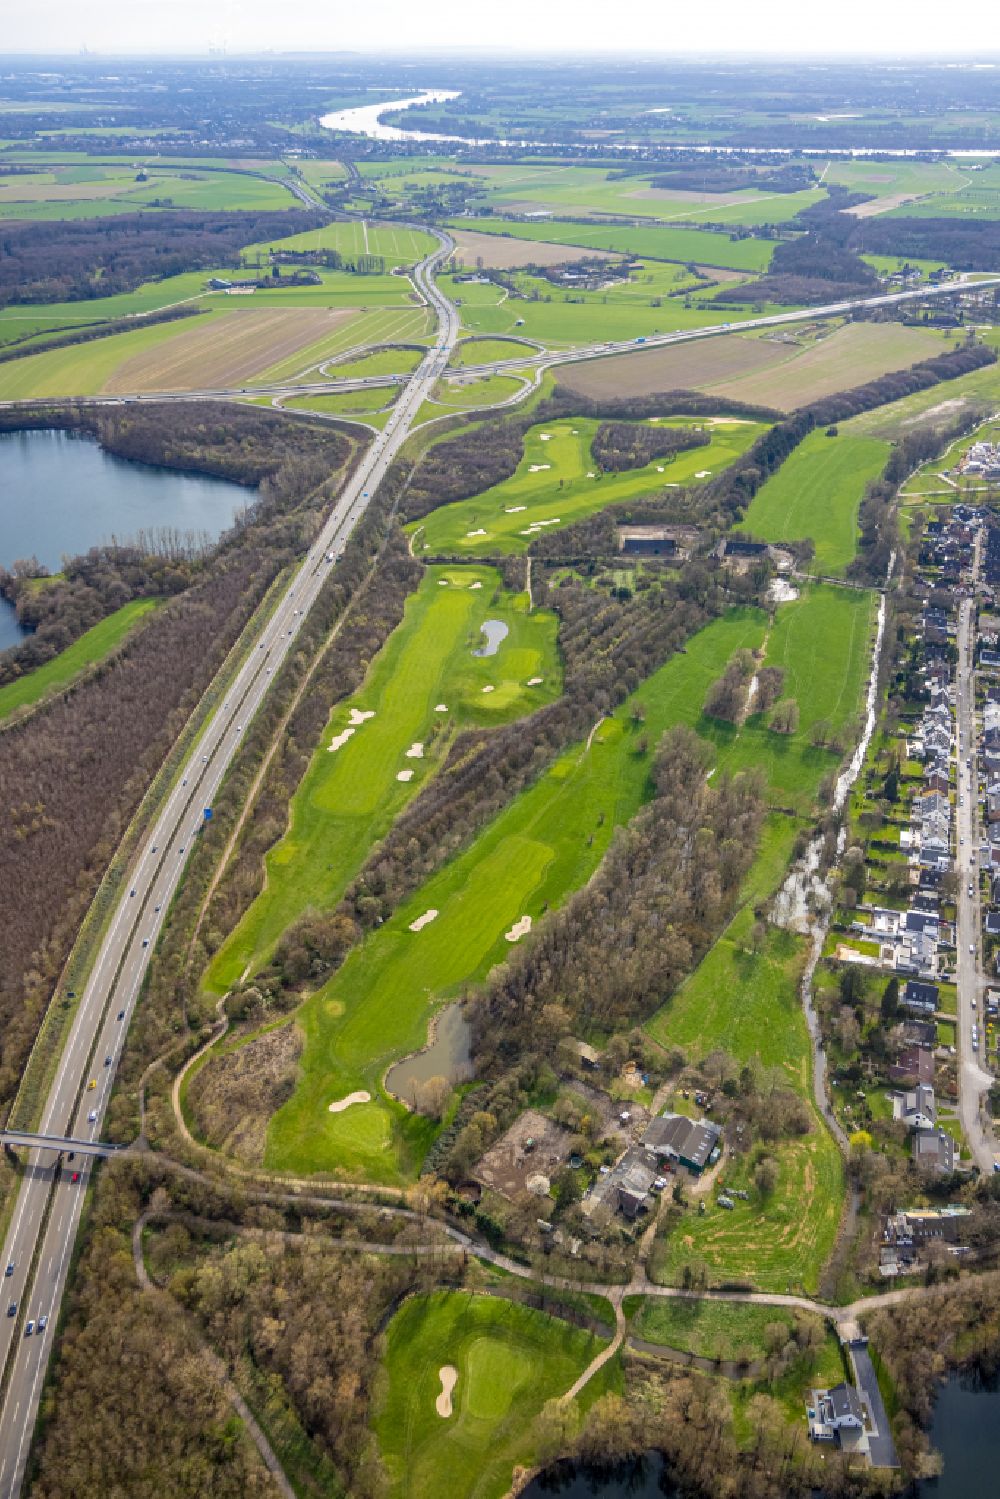 Aerial image Duisburg - Golf course Golf & More in the district Huckingen in Duisburg in the Ruhr area in the state North Rhine-Westphalia, Germany